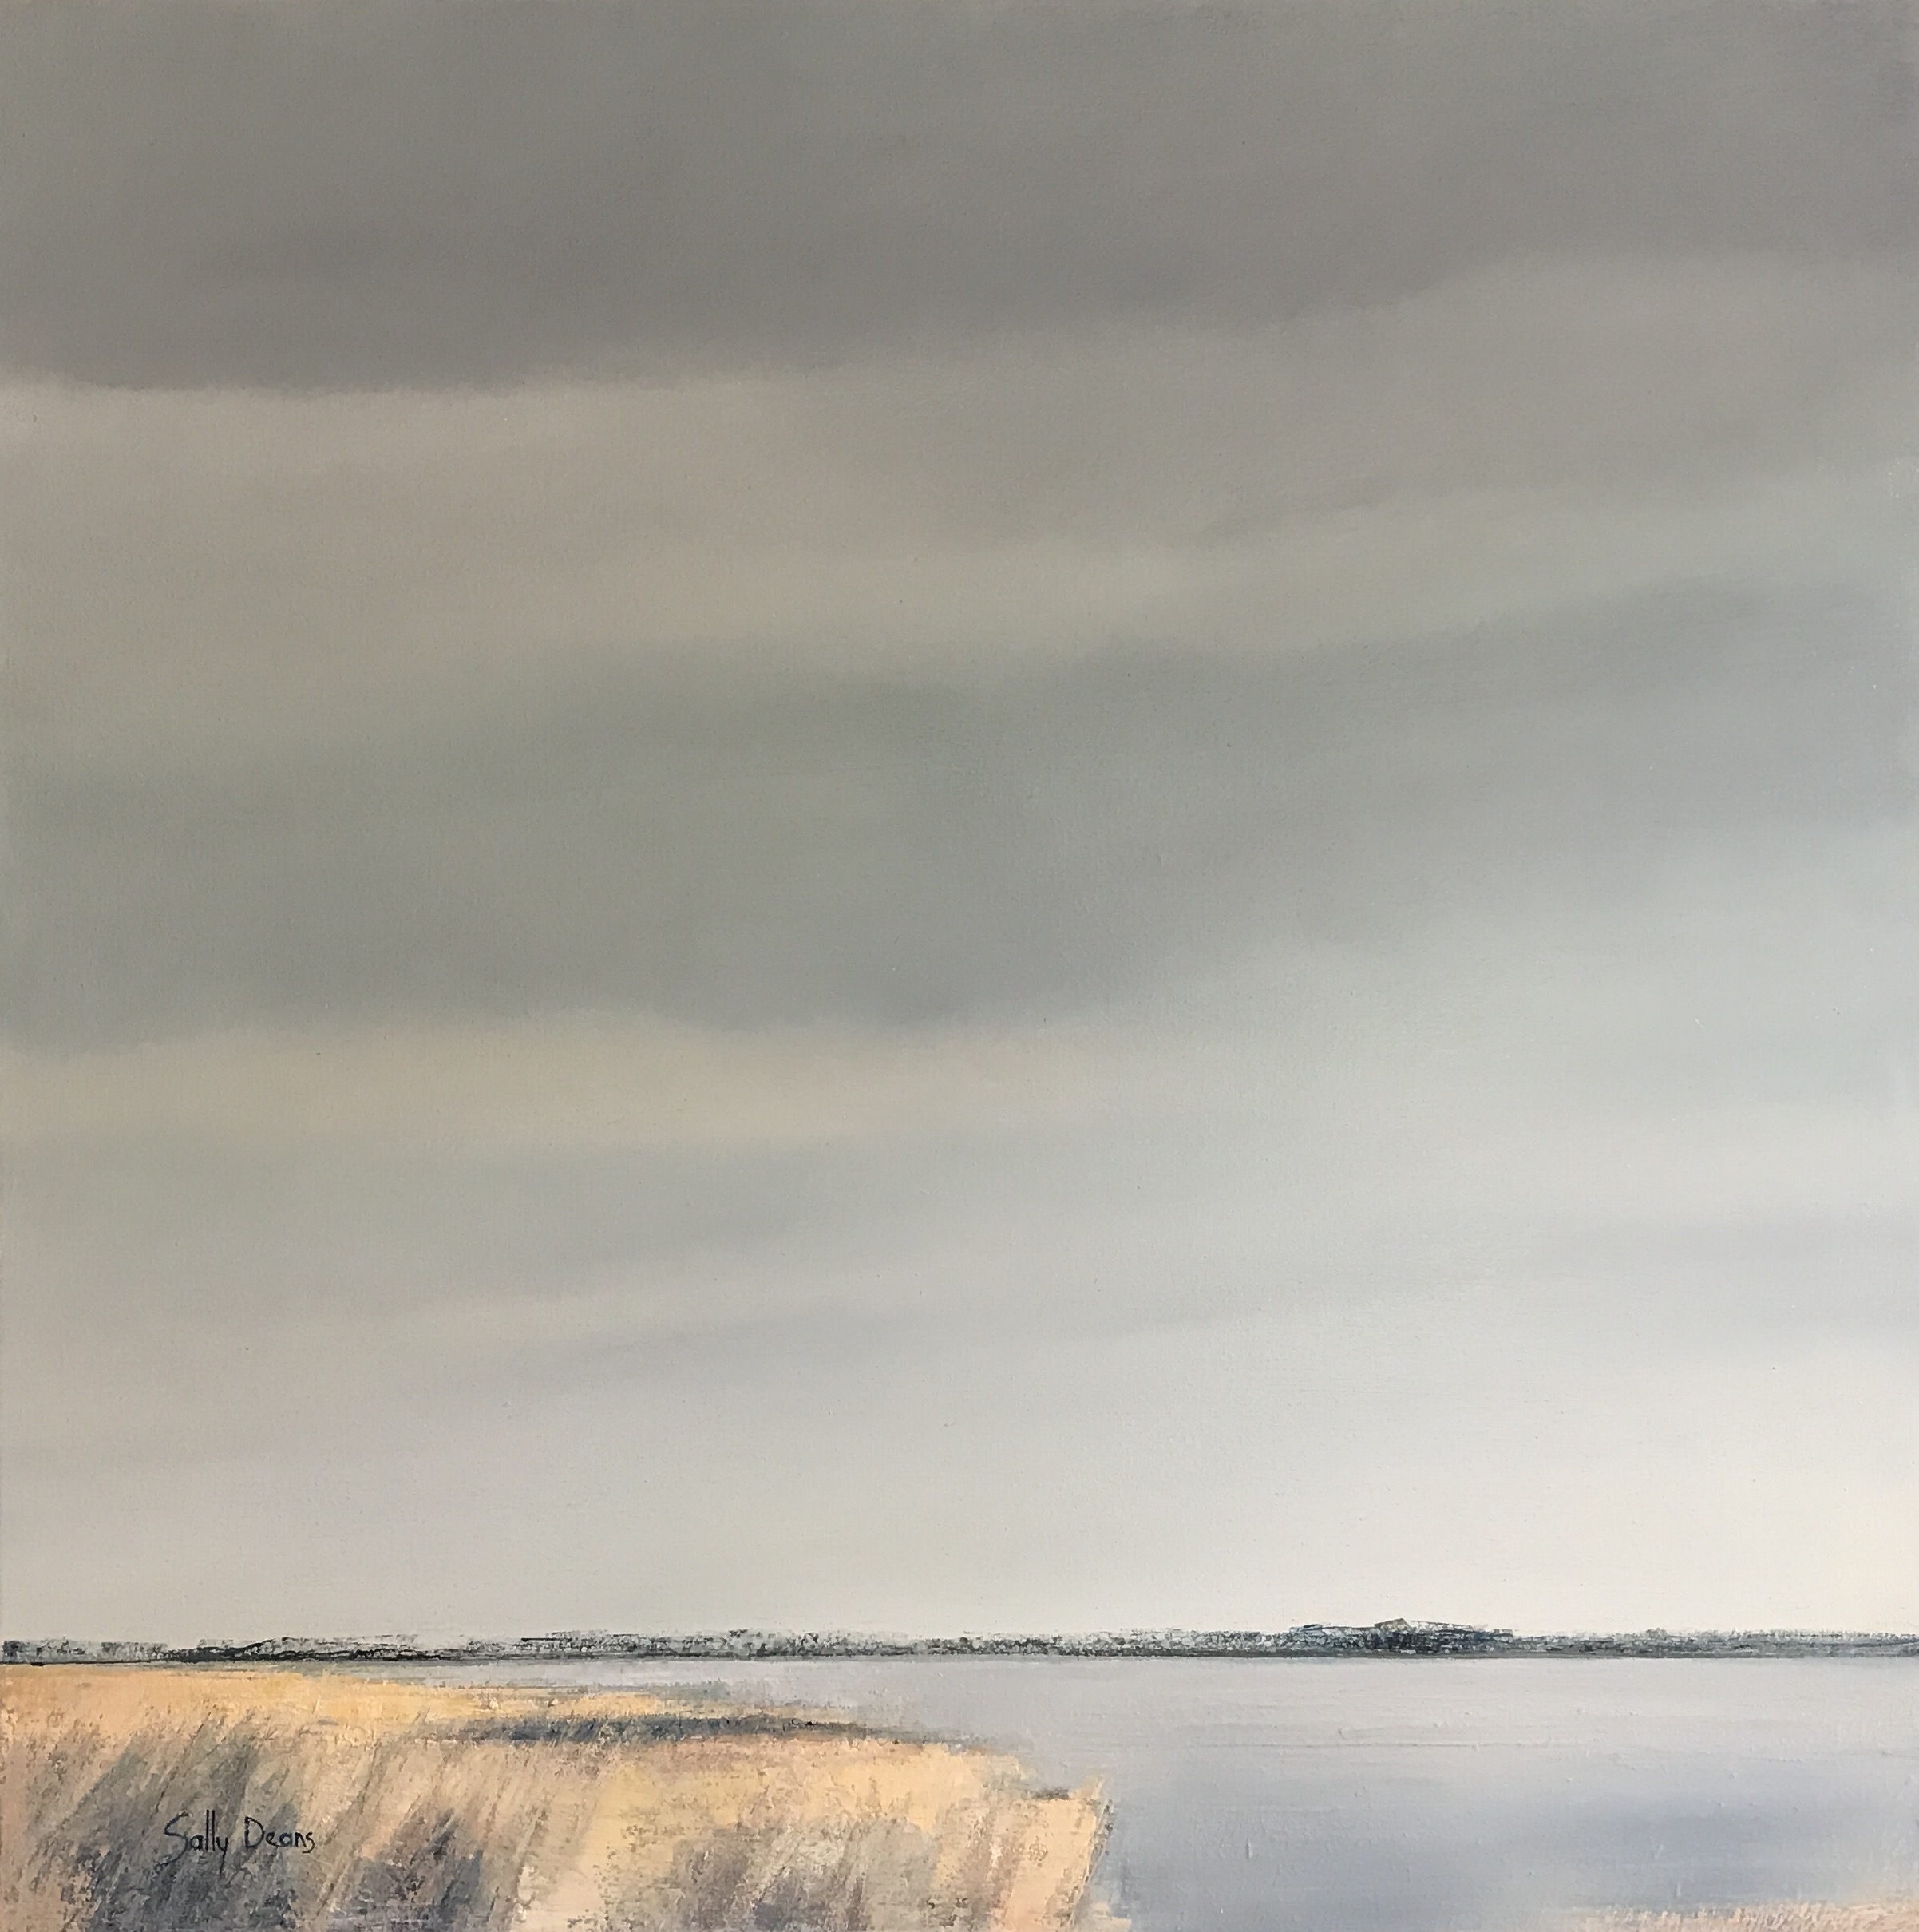  Sally Deans,&nbsp; May Afternoon in Silver and Gold , 2017, oil on canvas, 78 x 78cm 